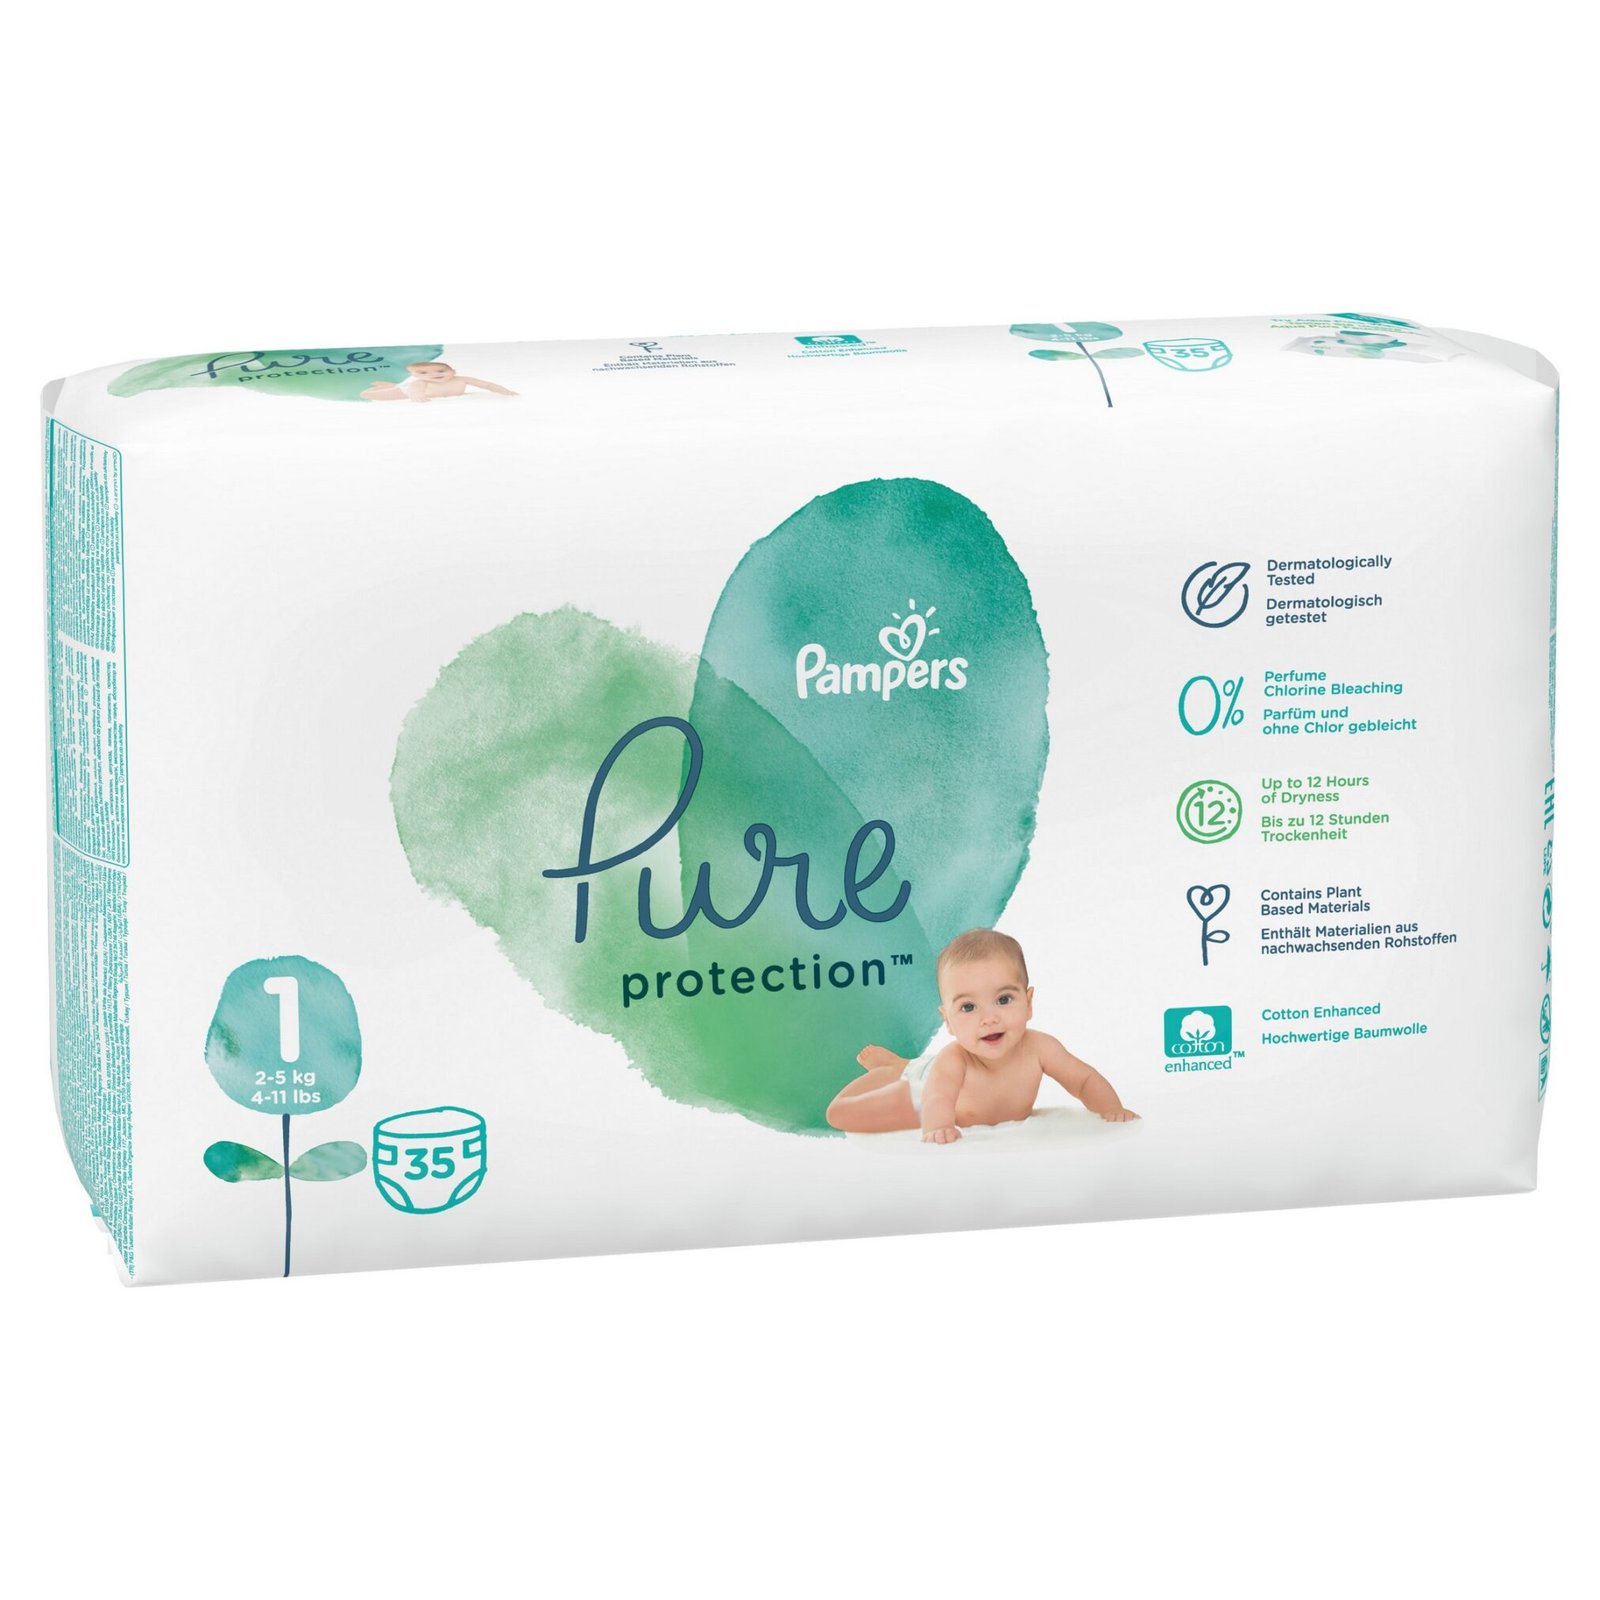 Pampers Pure Protection Diapers, Wipes